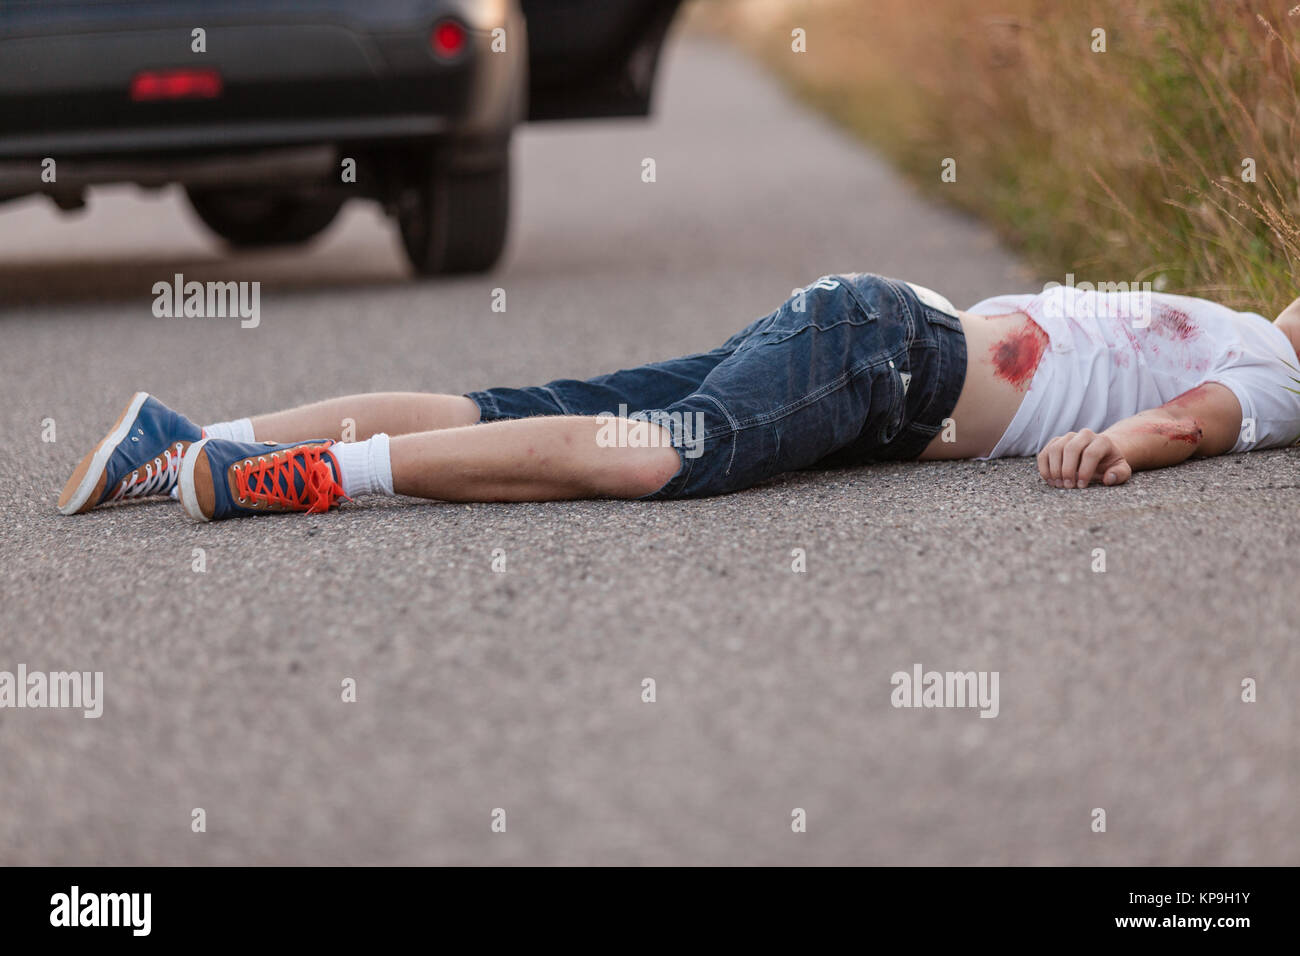 Young boy run over by a car Stock Photo